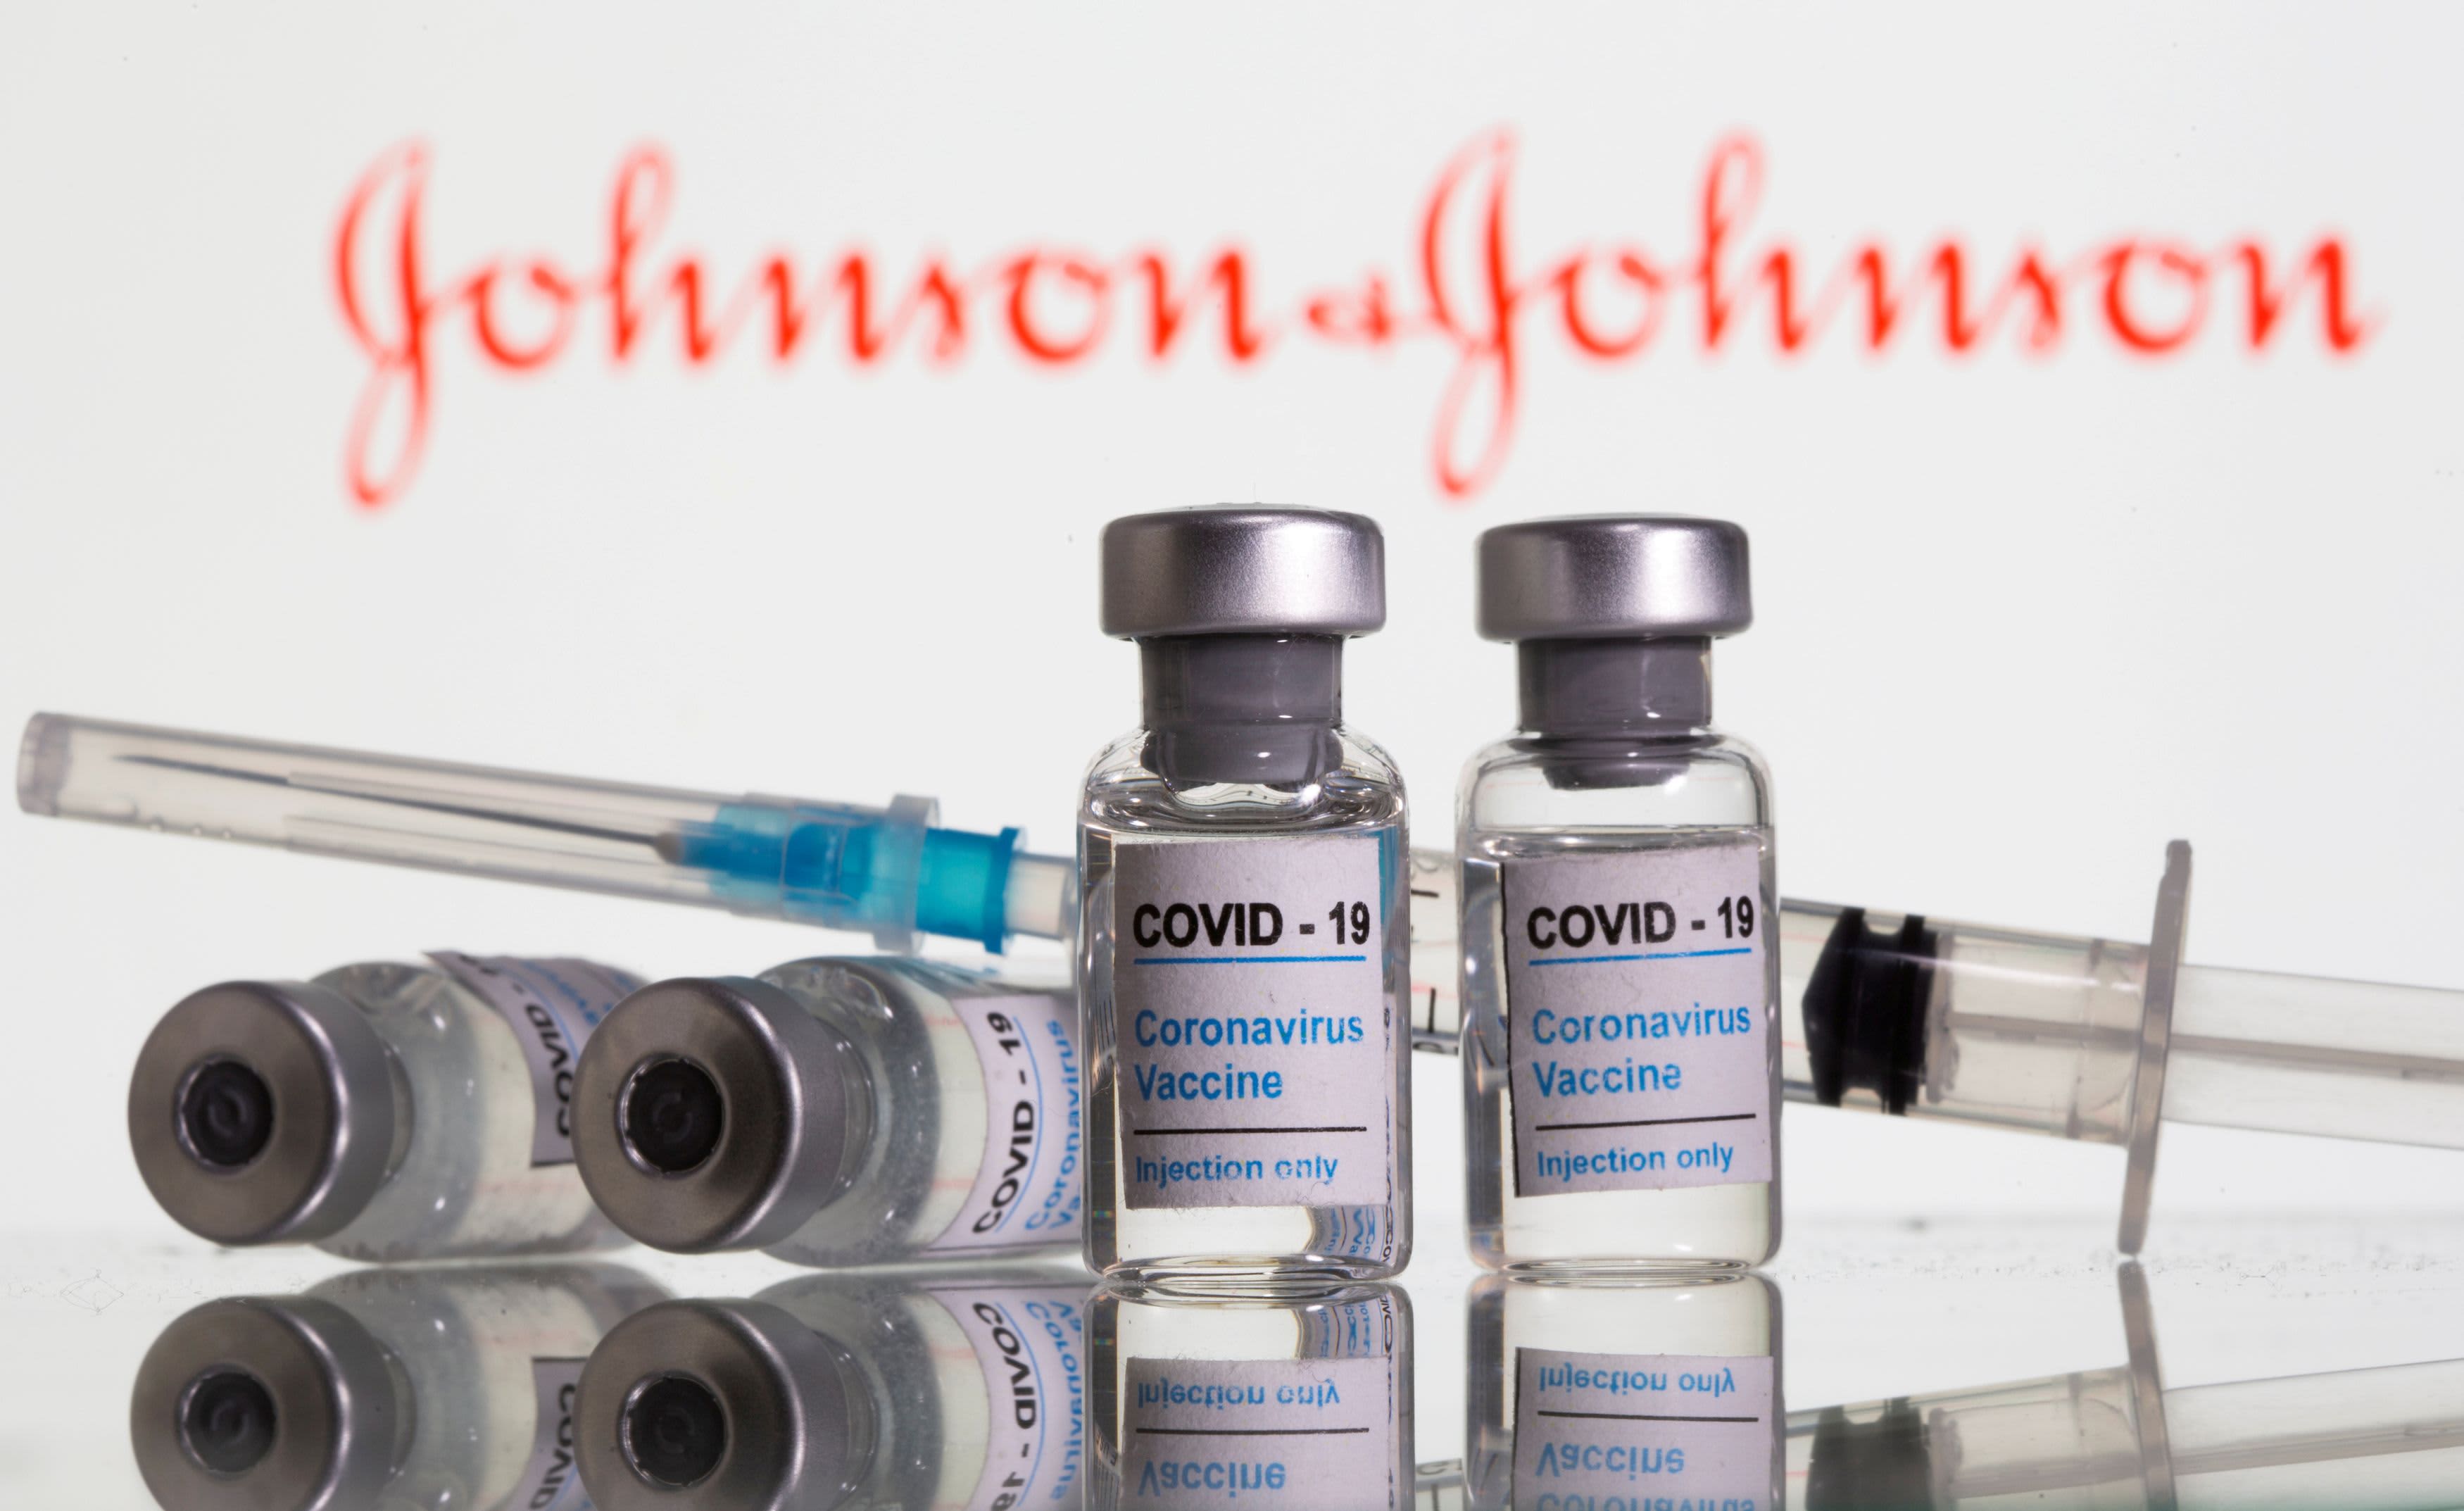 U.S. states face steep decline in J&J Covid vaccine amid production problems at Baltimore plant